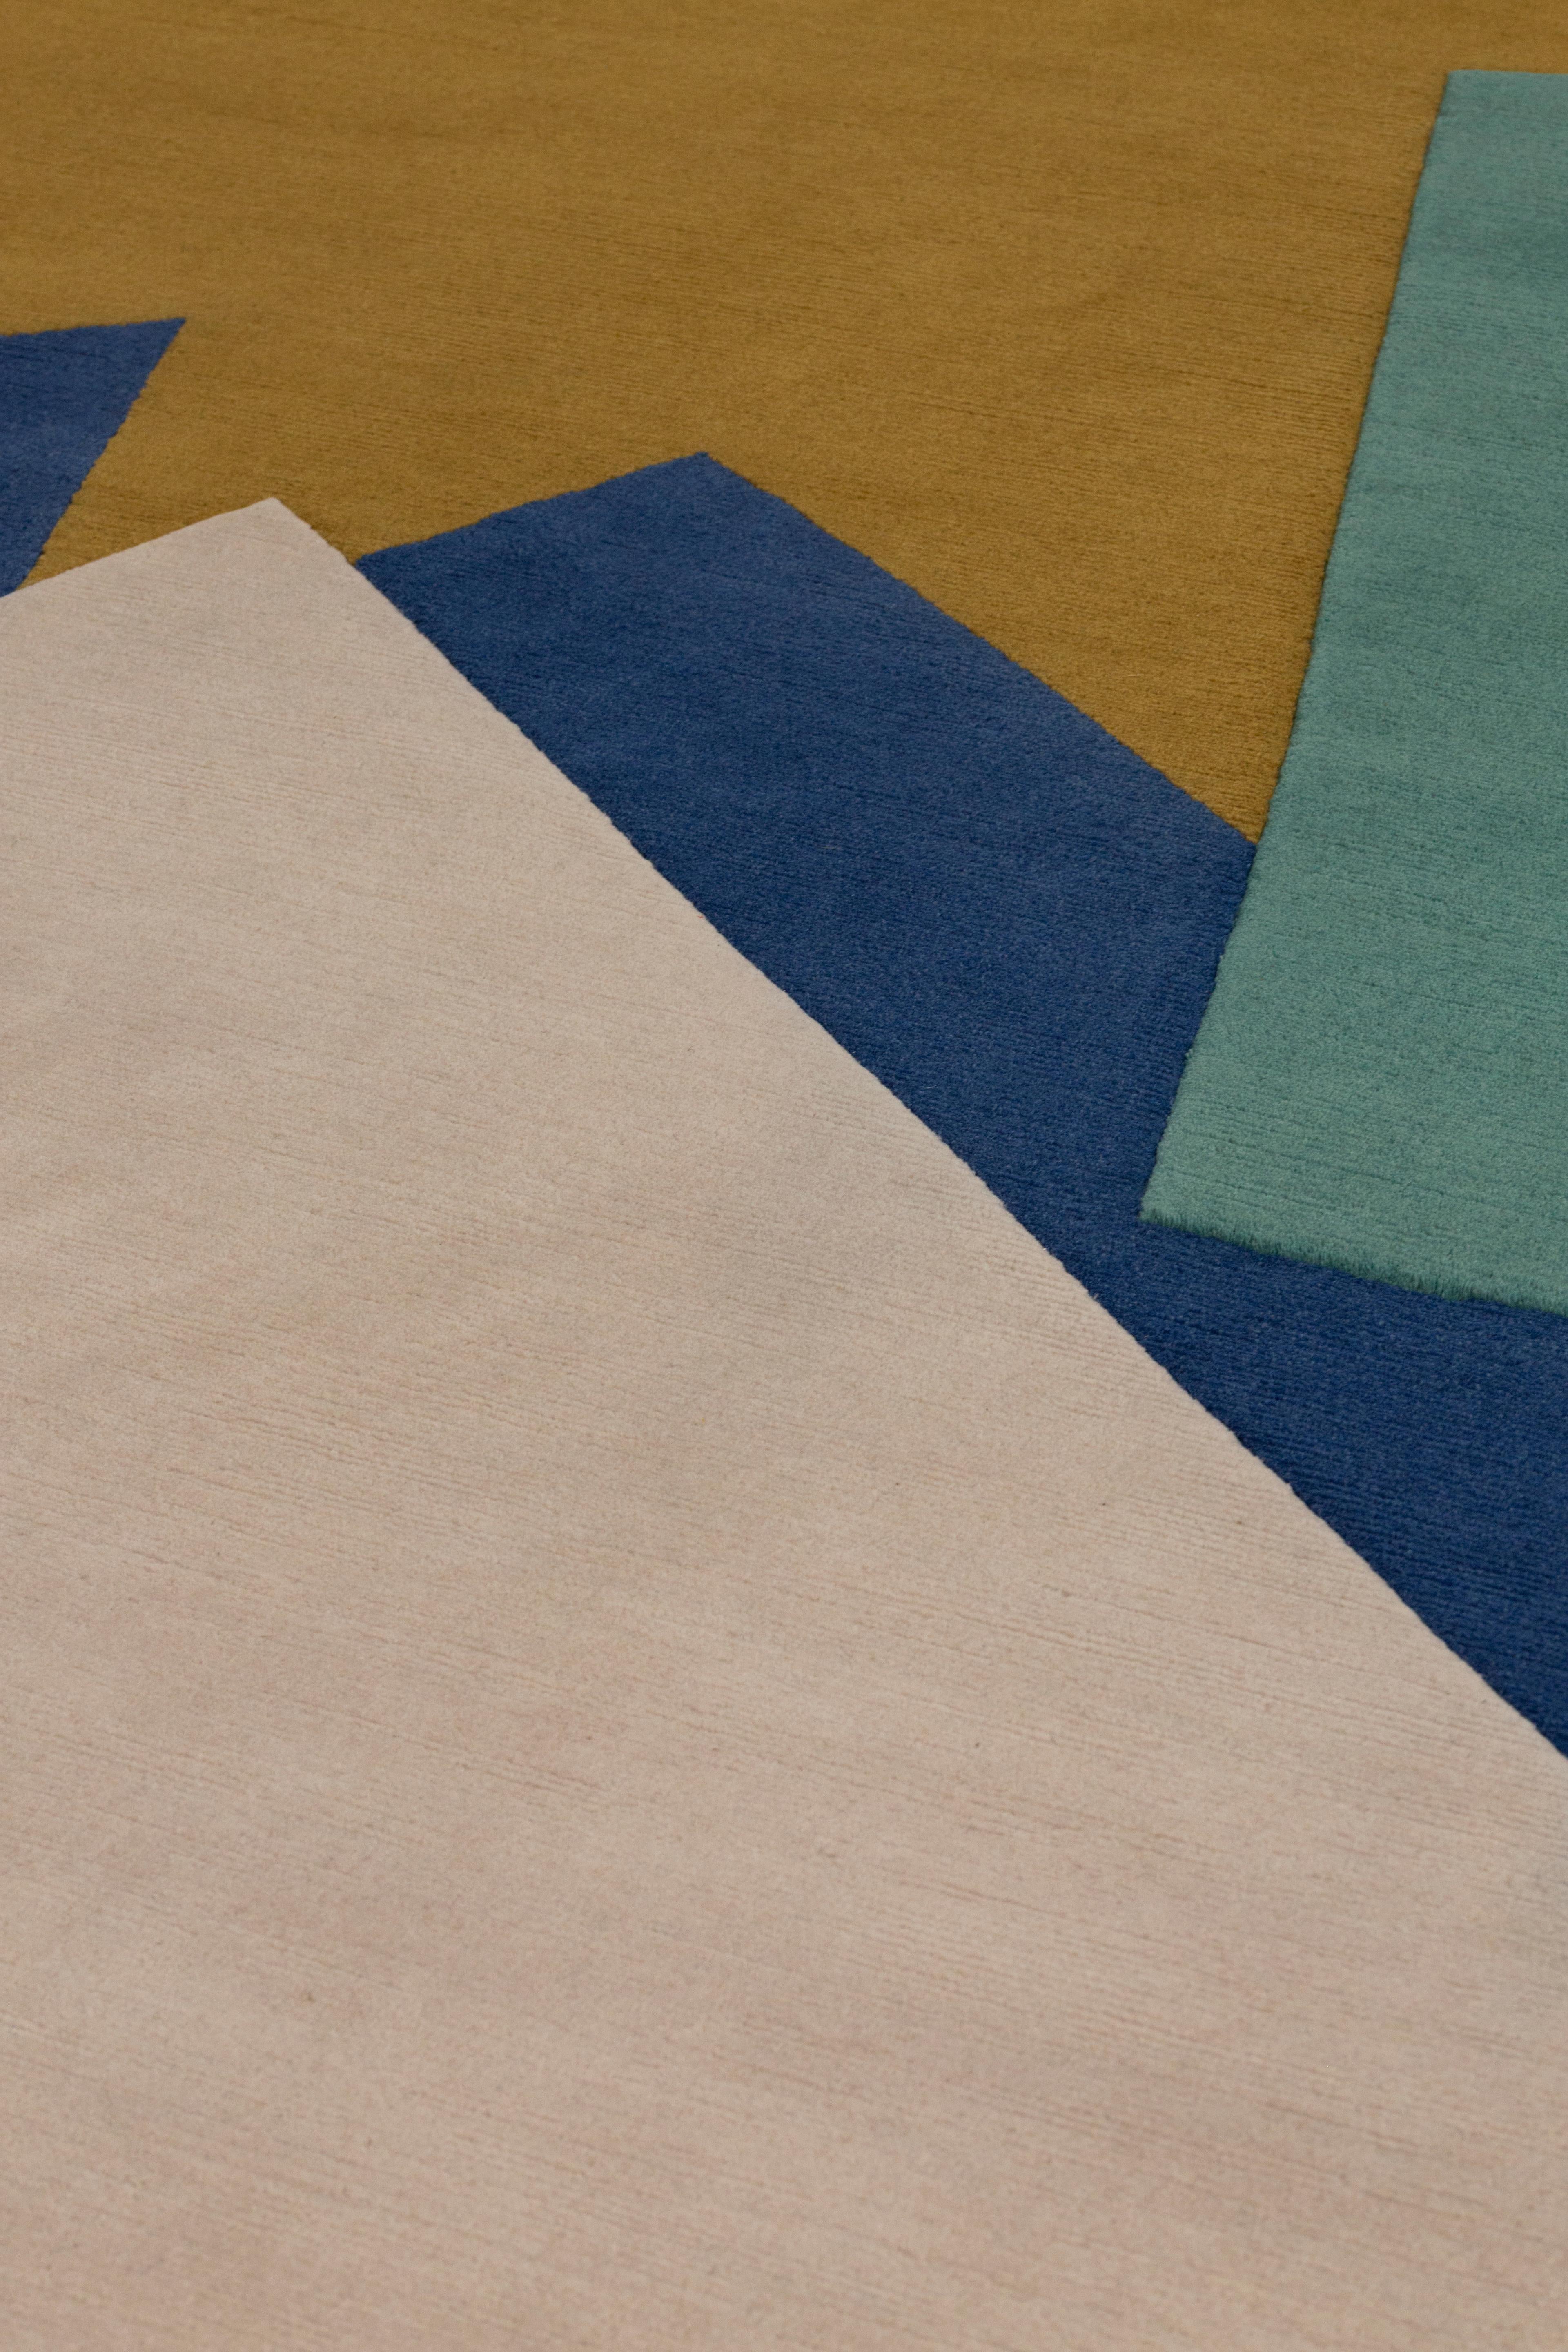 cc-tapis Ombra Block Rug by Muller Van Severen In New Condition For Sale In Brooklyn, NY